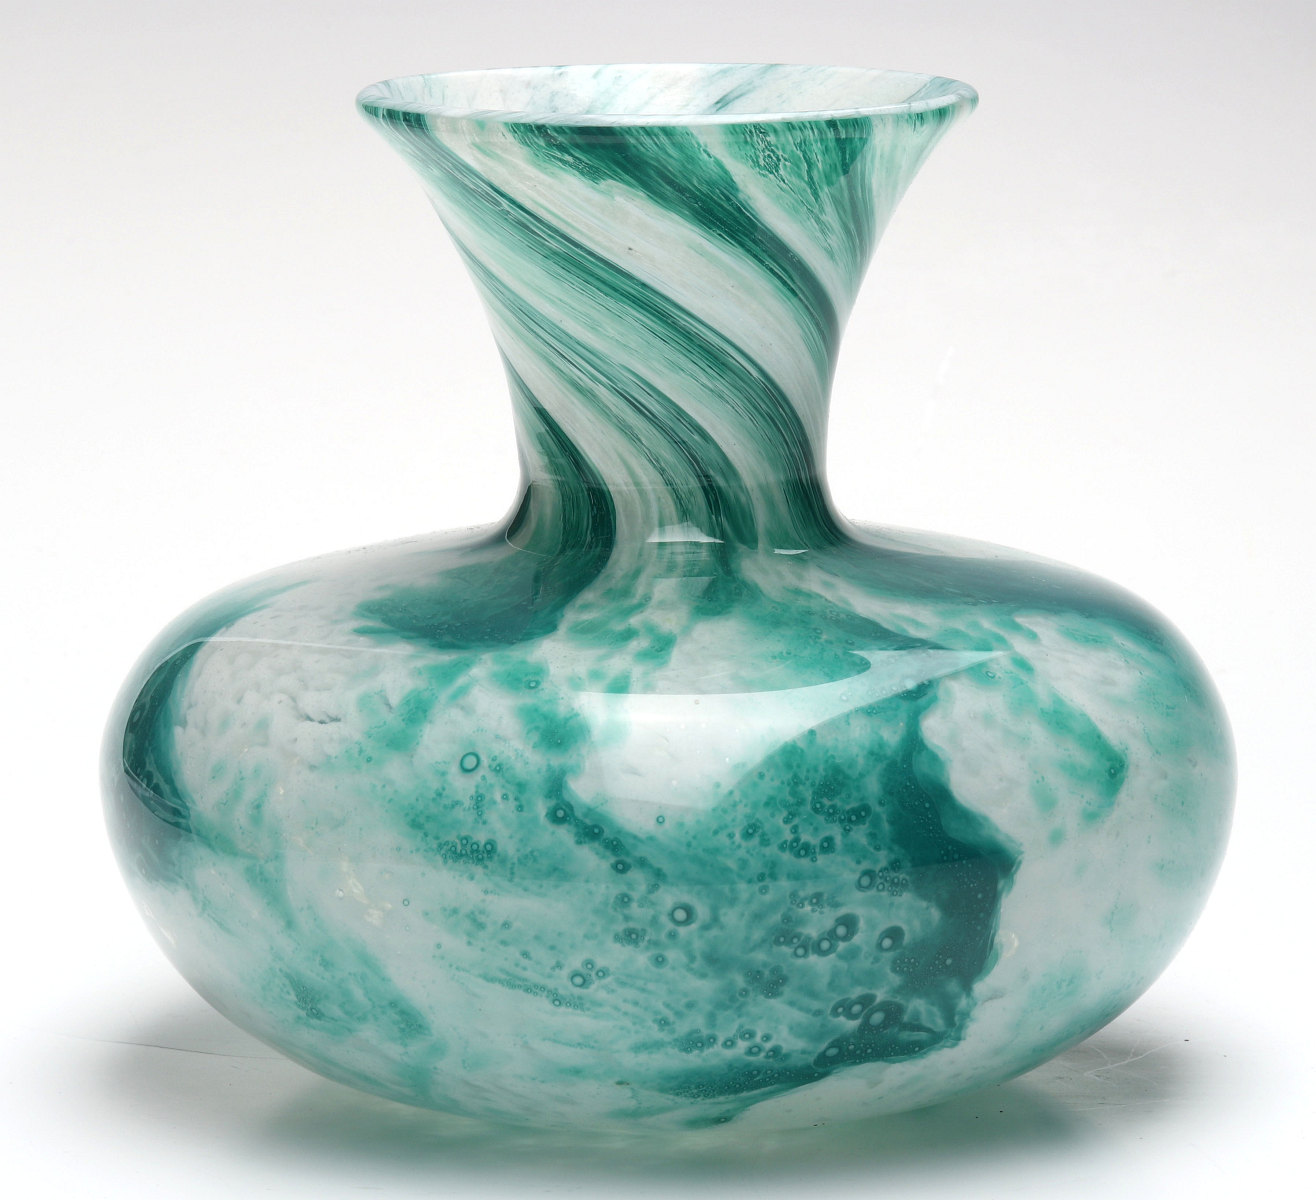 A DURAND KIMBALL CLUTHRA ART GLASS VASE